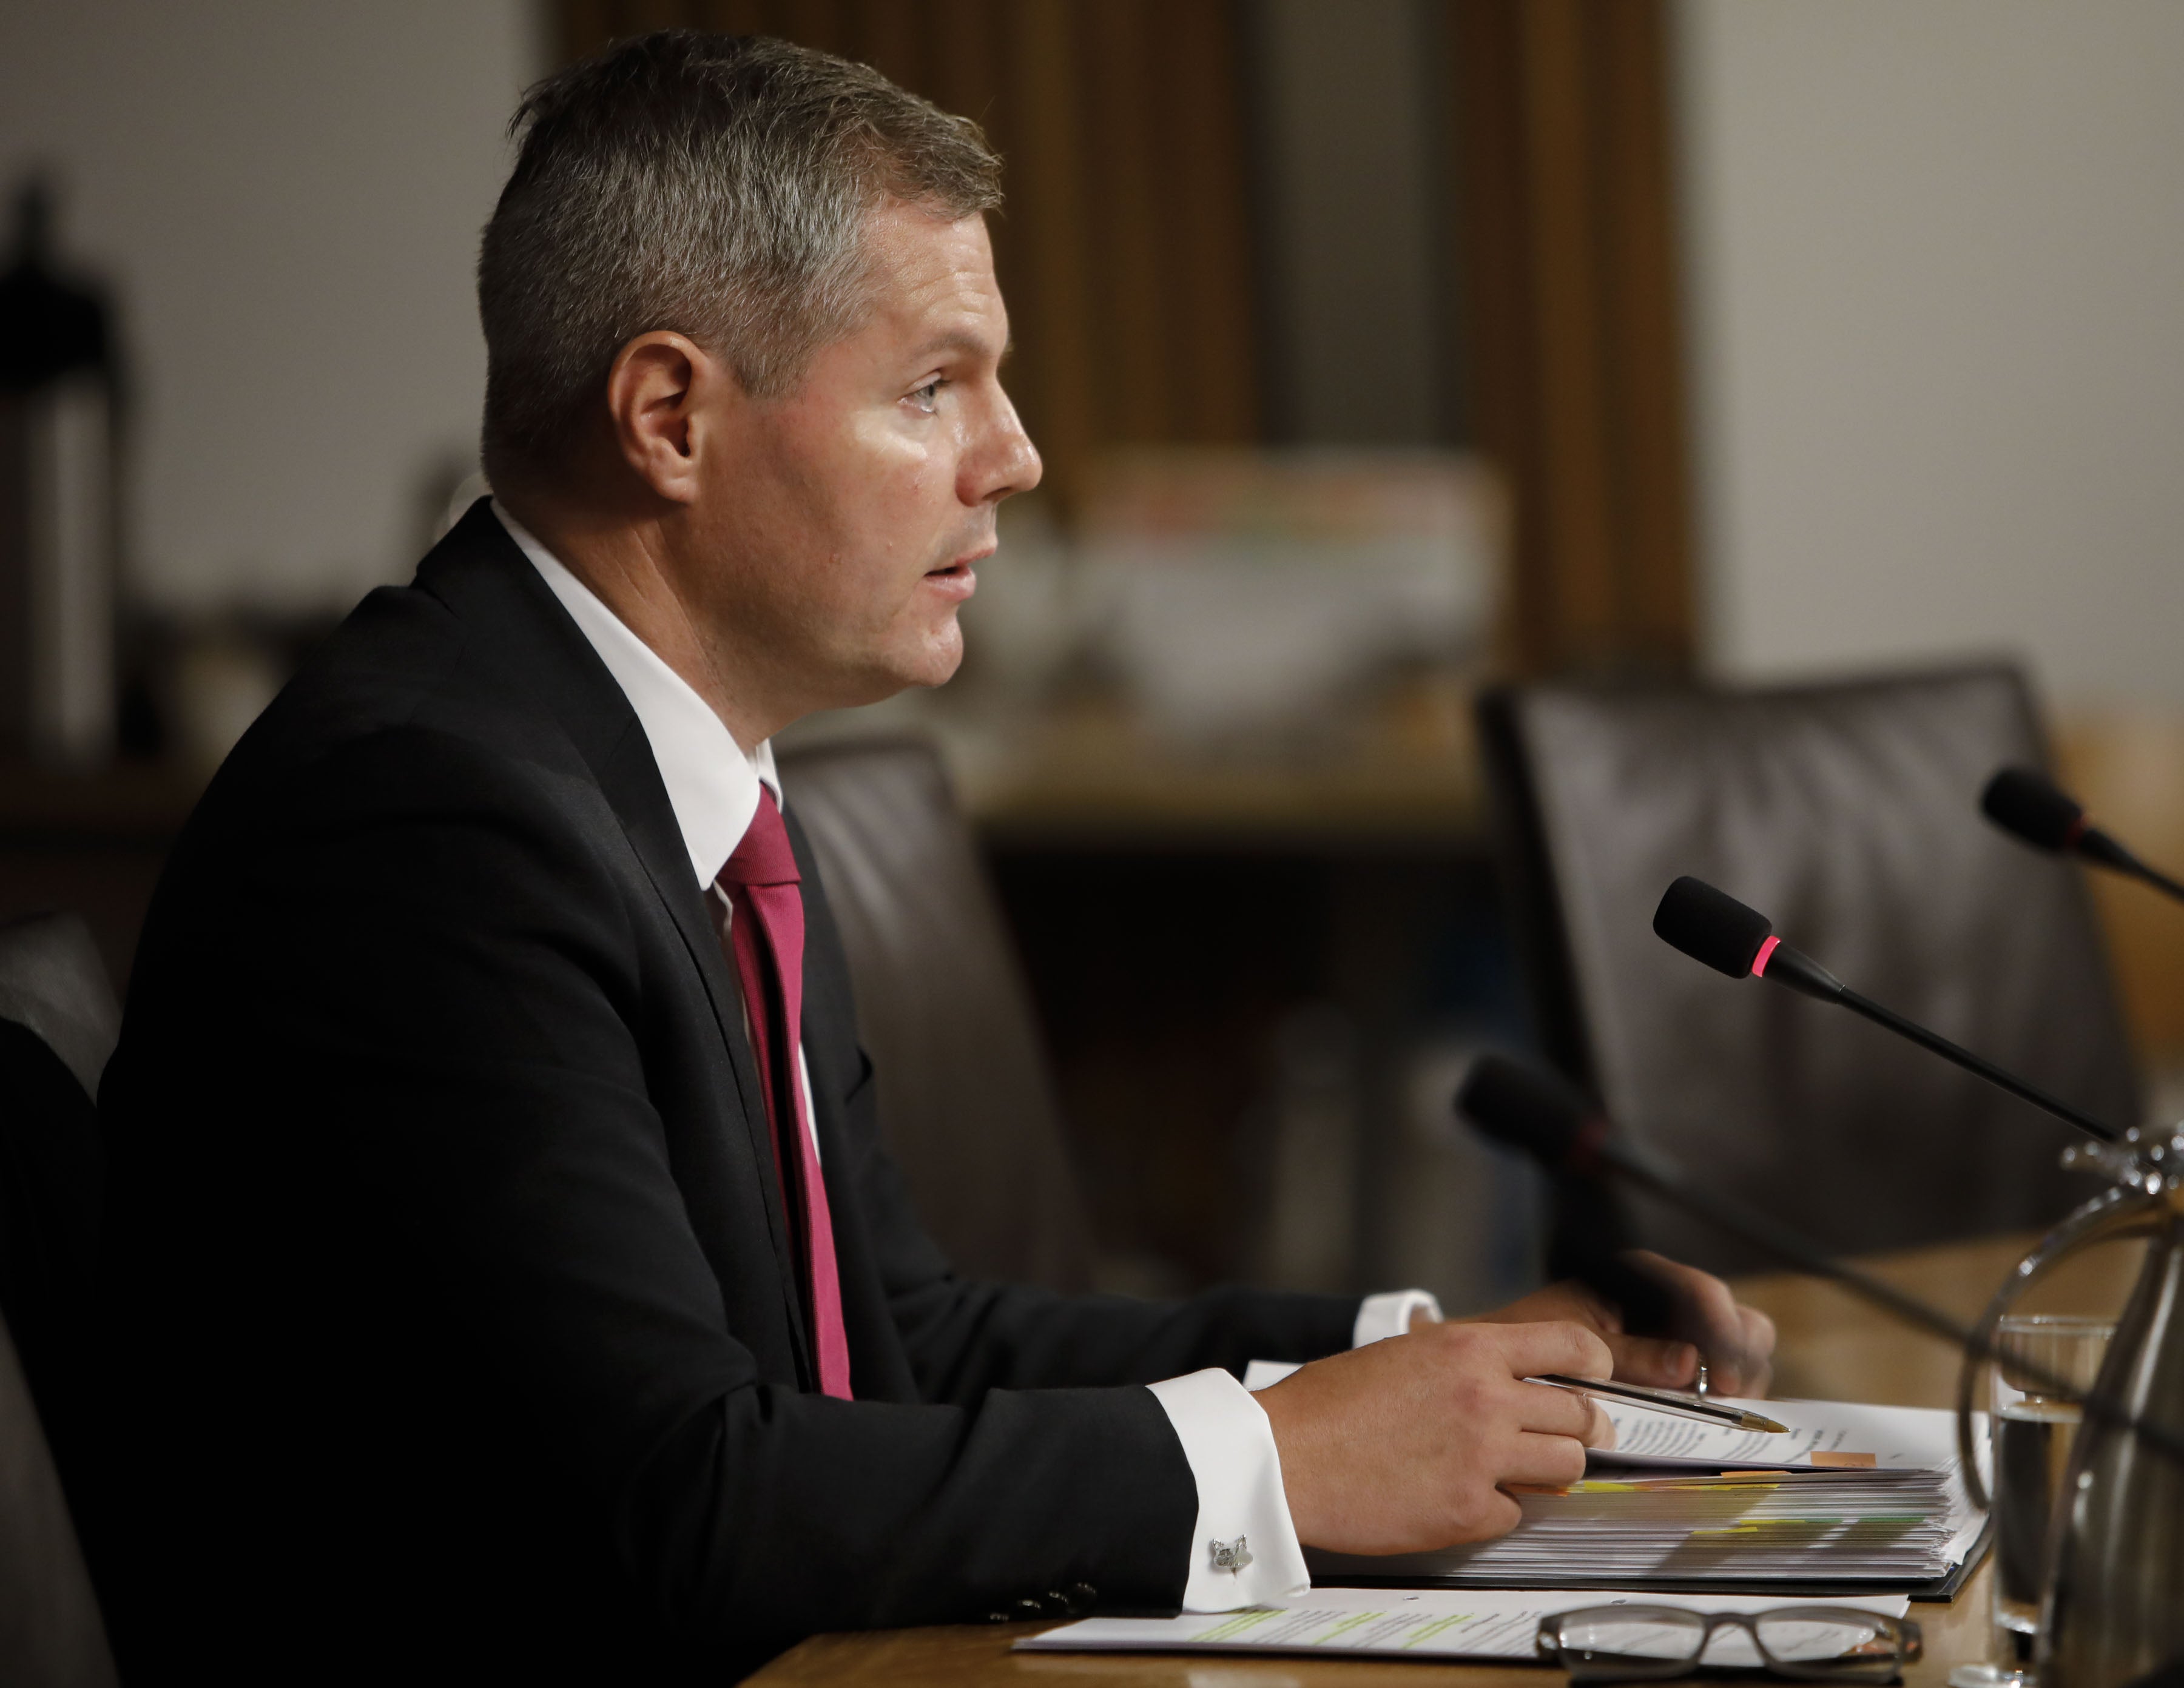 Derek Mackay faced the Public Audit Committee in his first Holyrood appearance in more than two years (Andrew Cowan/Scottish Parliament/PA)